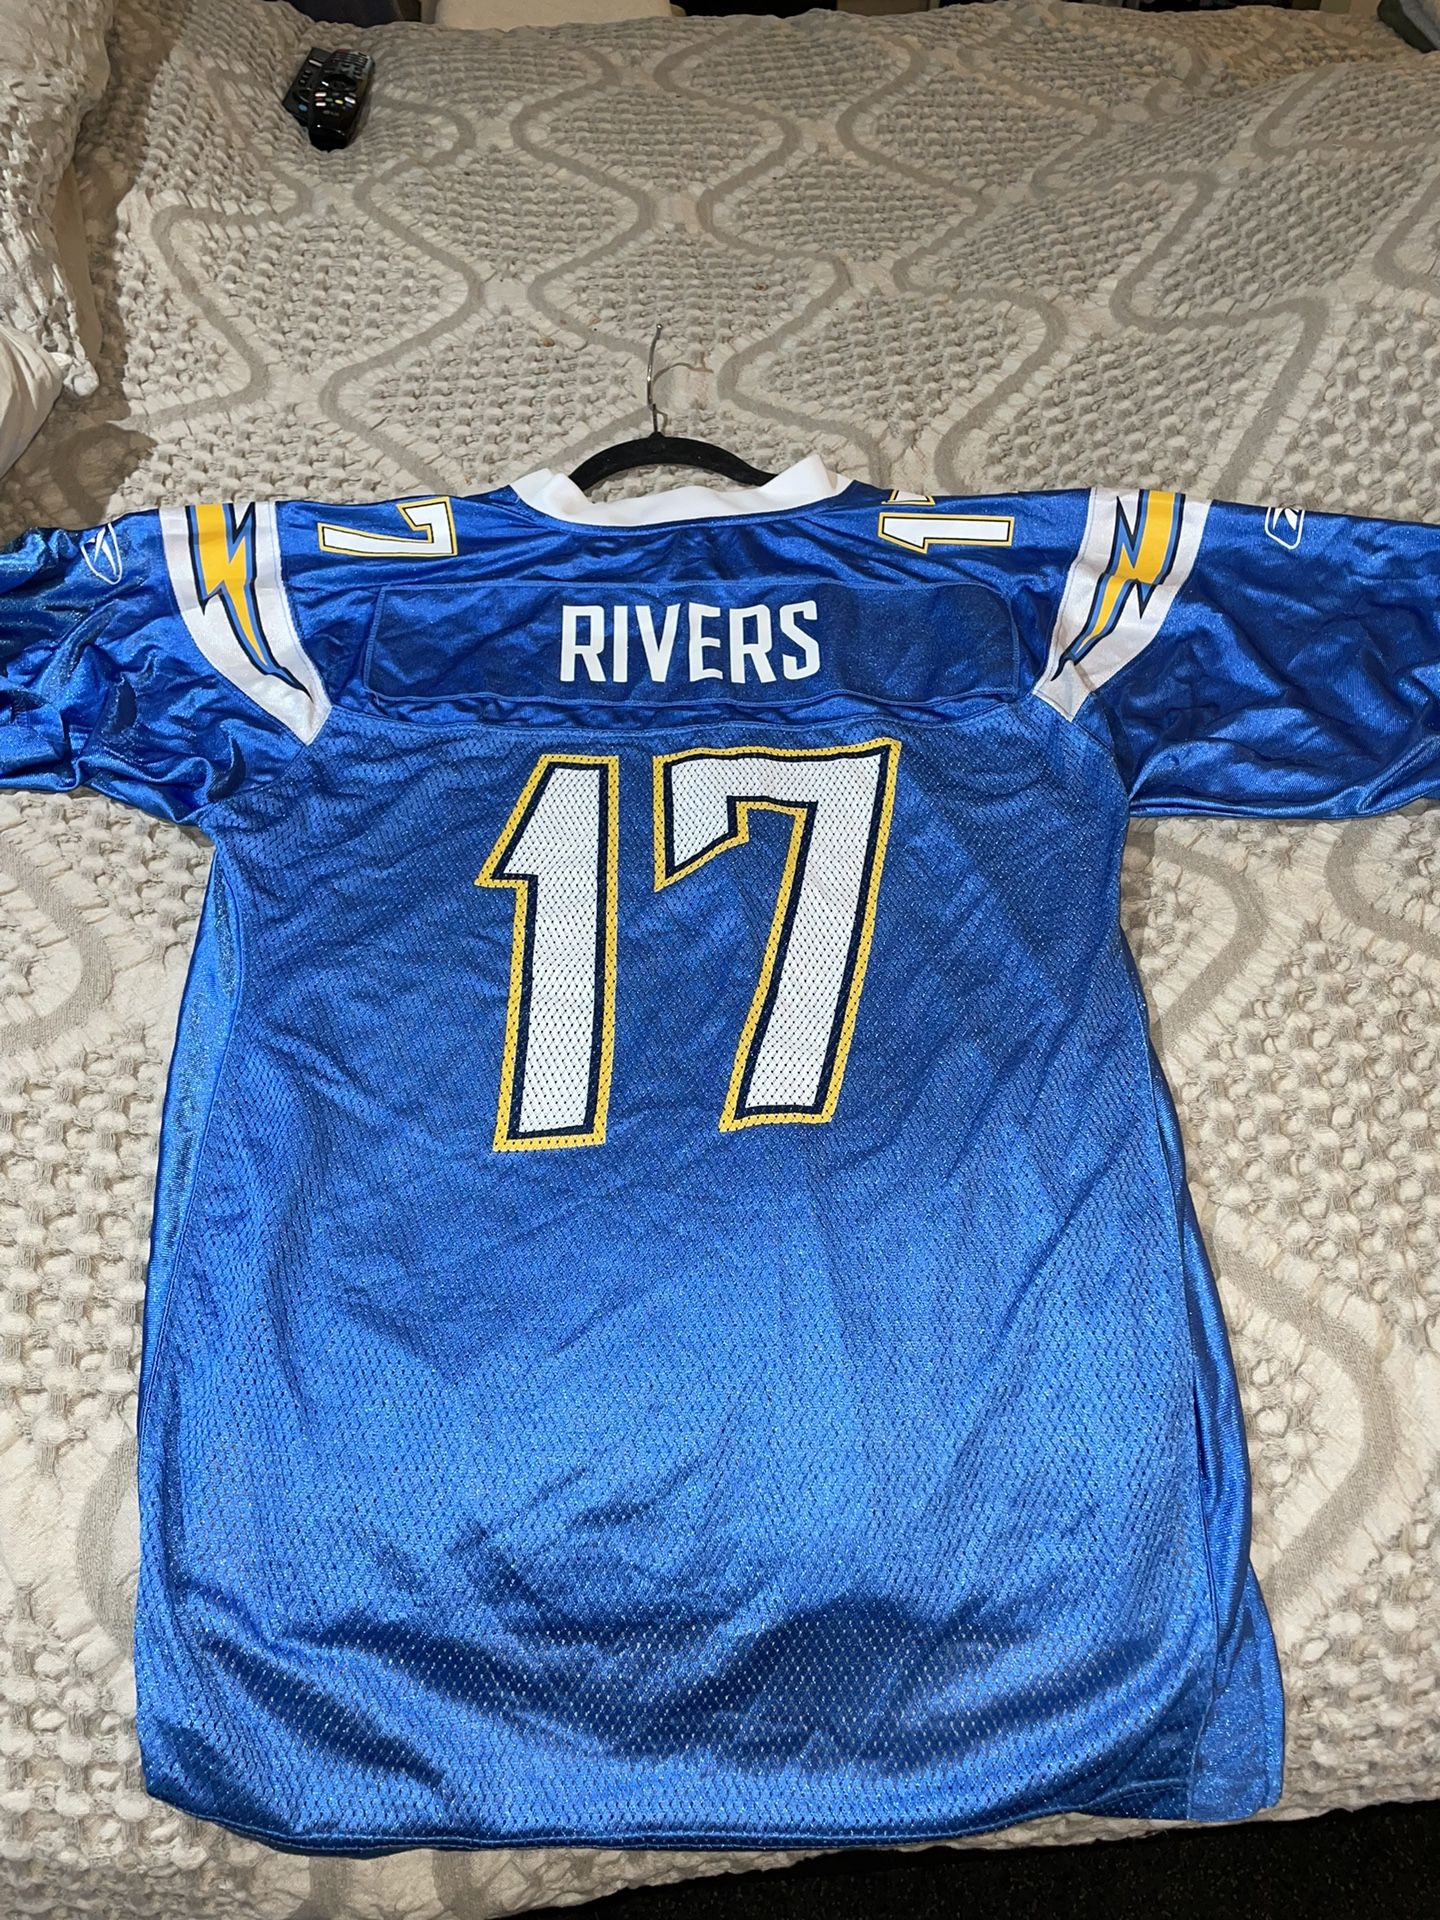 Rivers Official NFL Jersey 